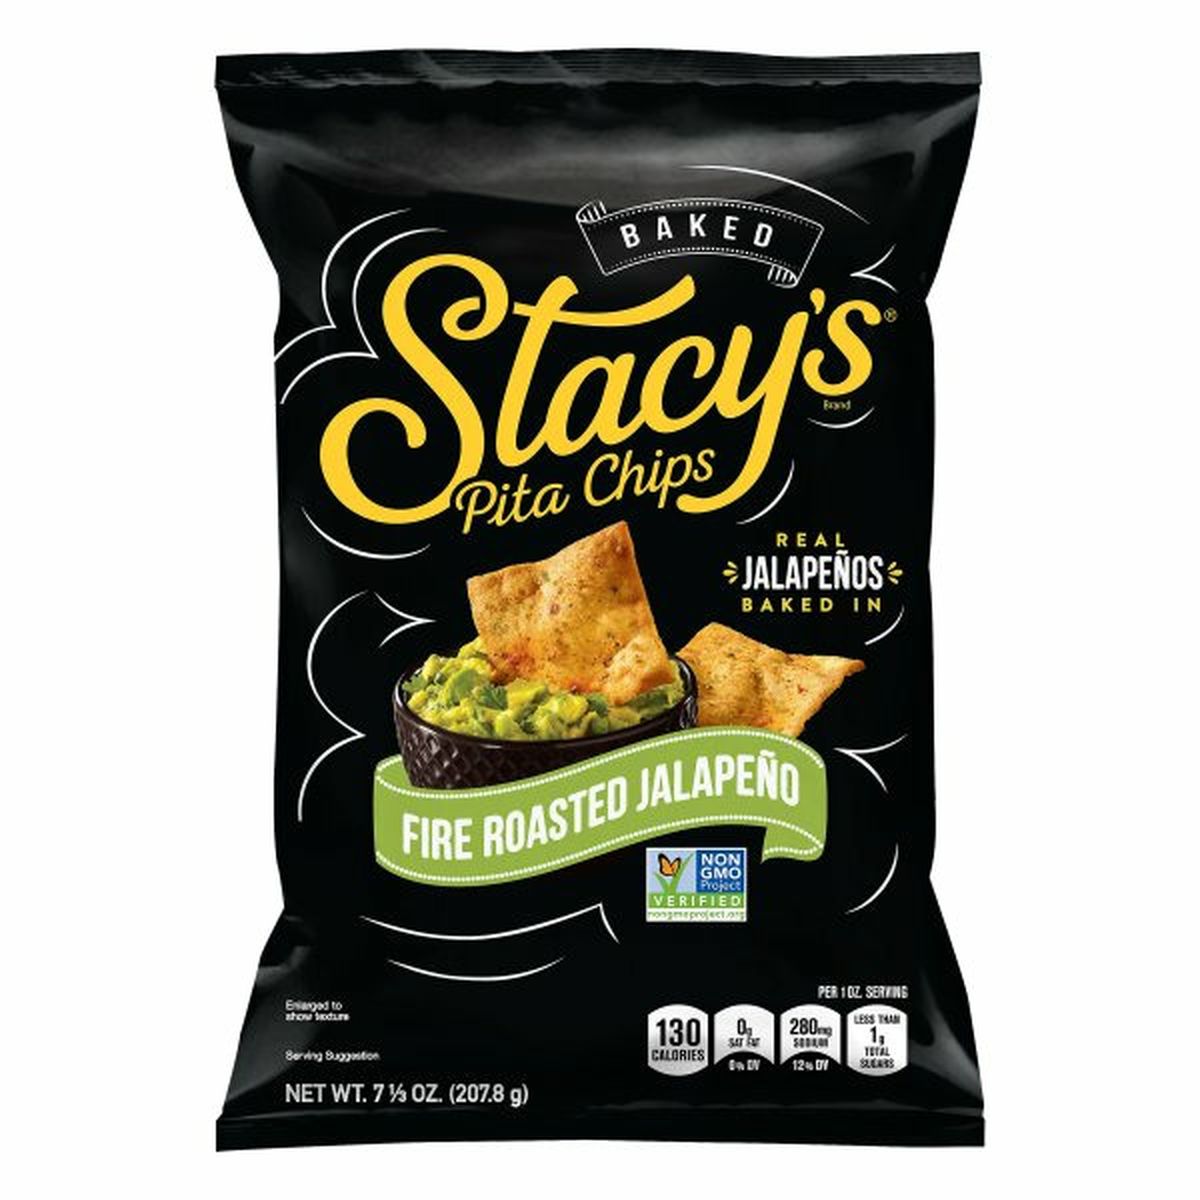 Calories in Stacy's Pita Chips, Fire Roasted Jalapeno